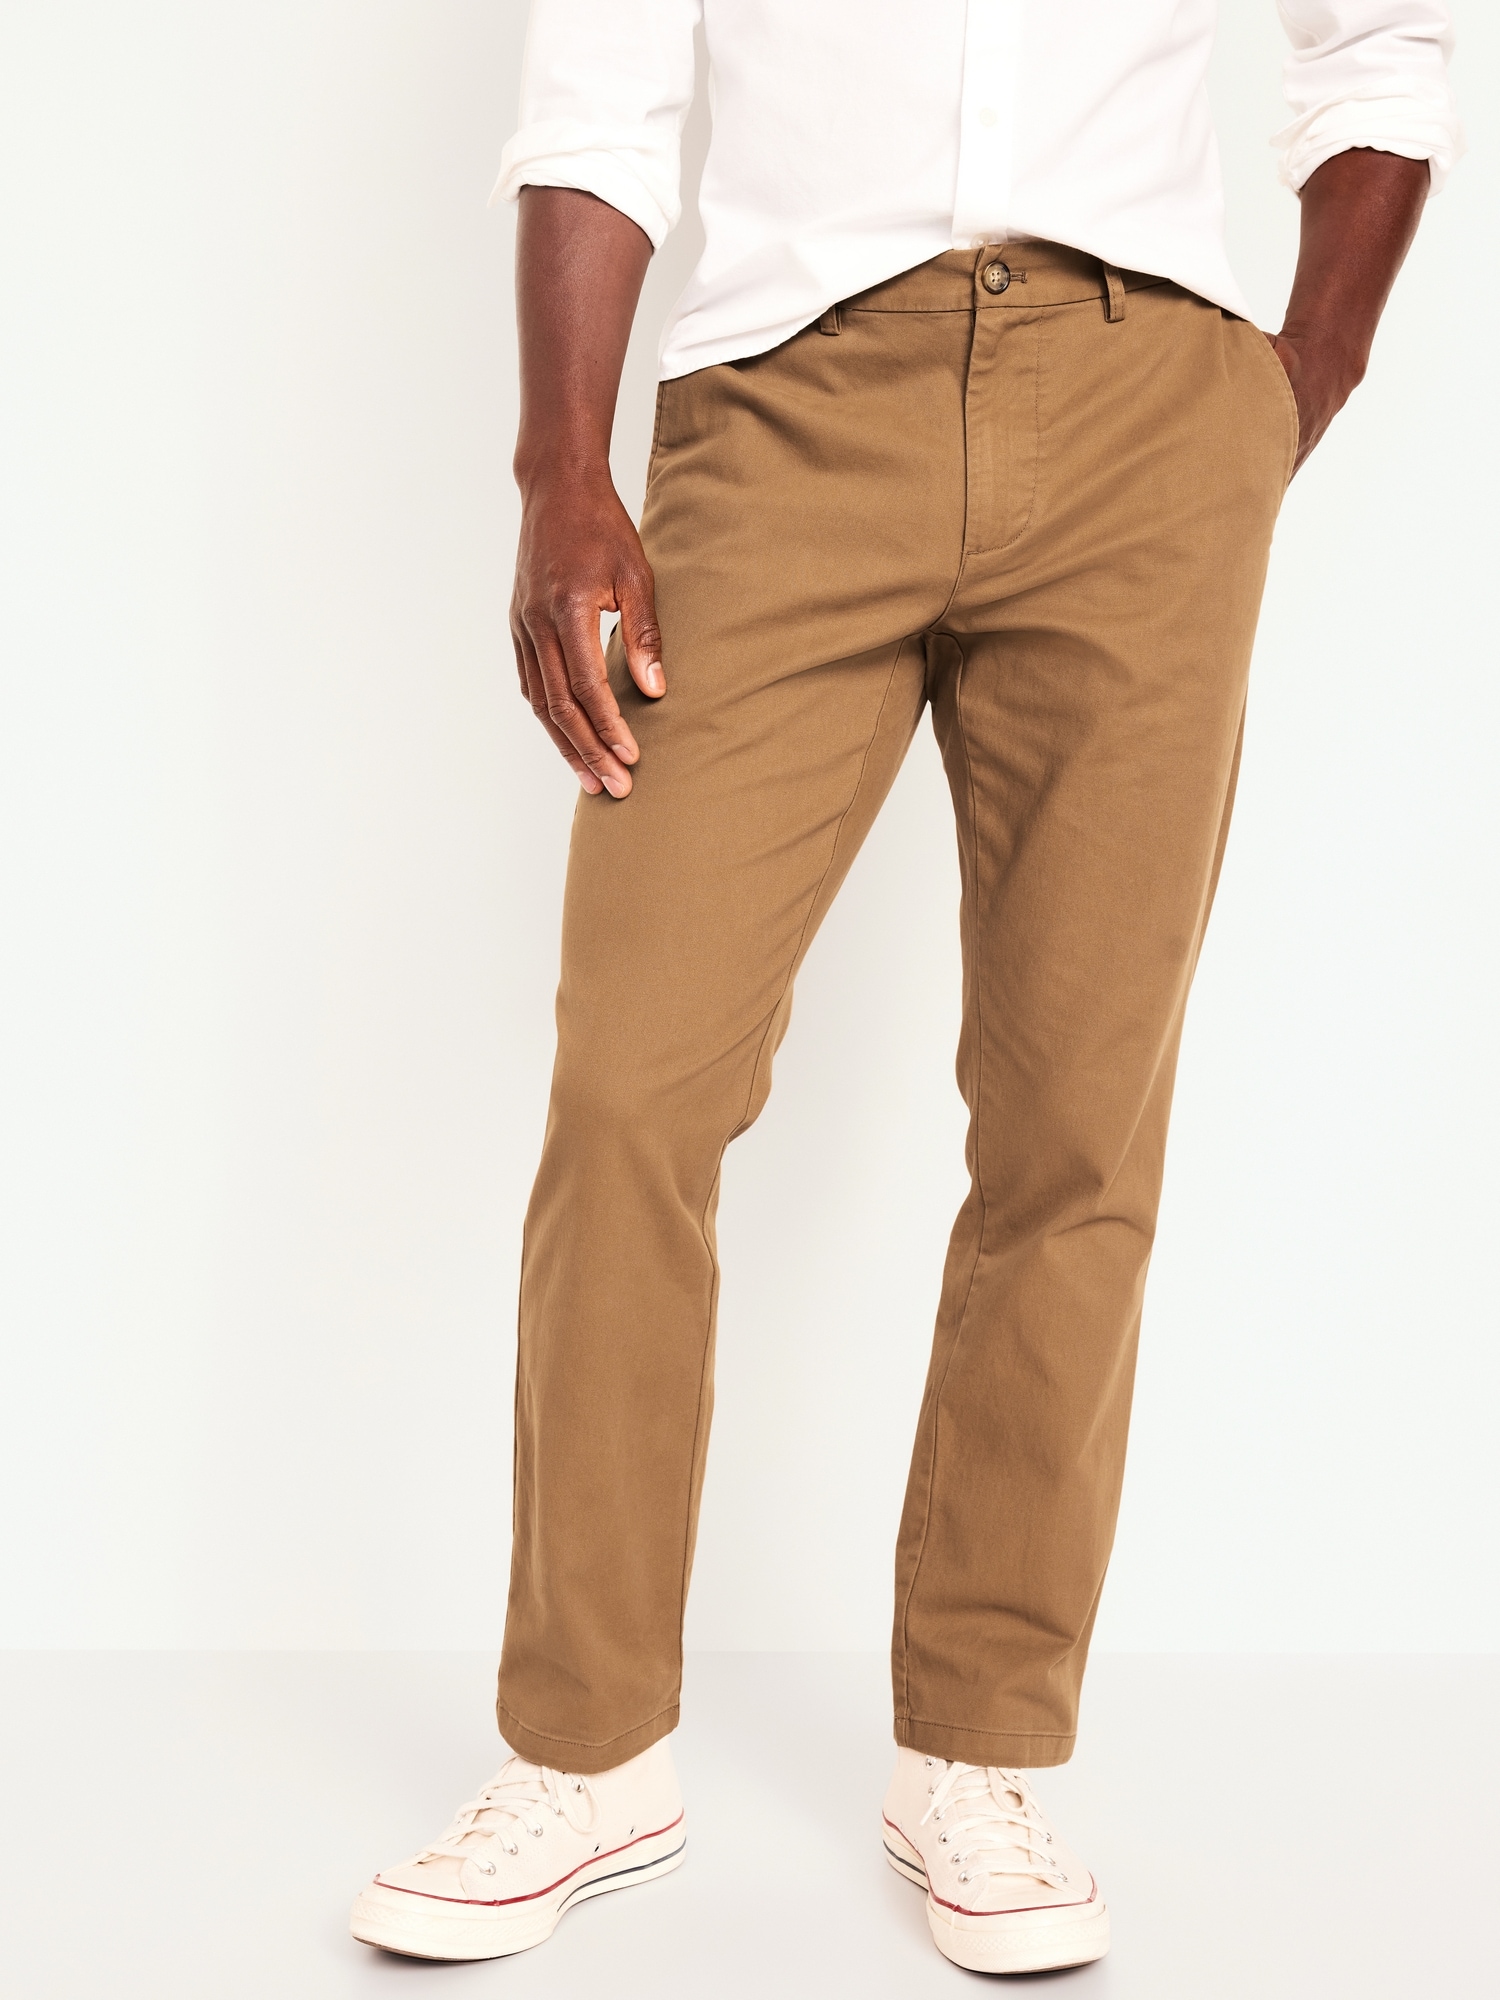 Buy U.S. Polo Assn. Flat Front Slim Fit Chinos - NNNOW.com